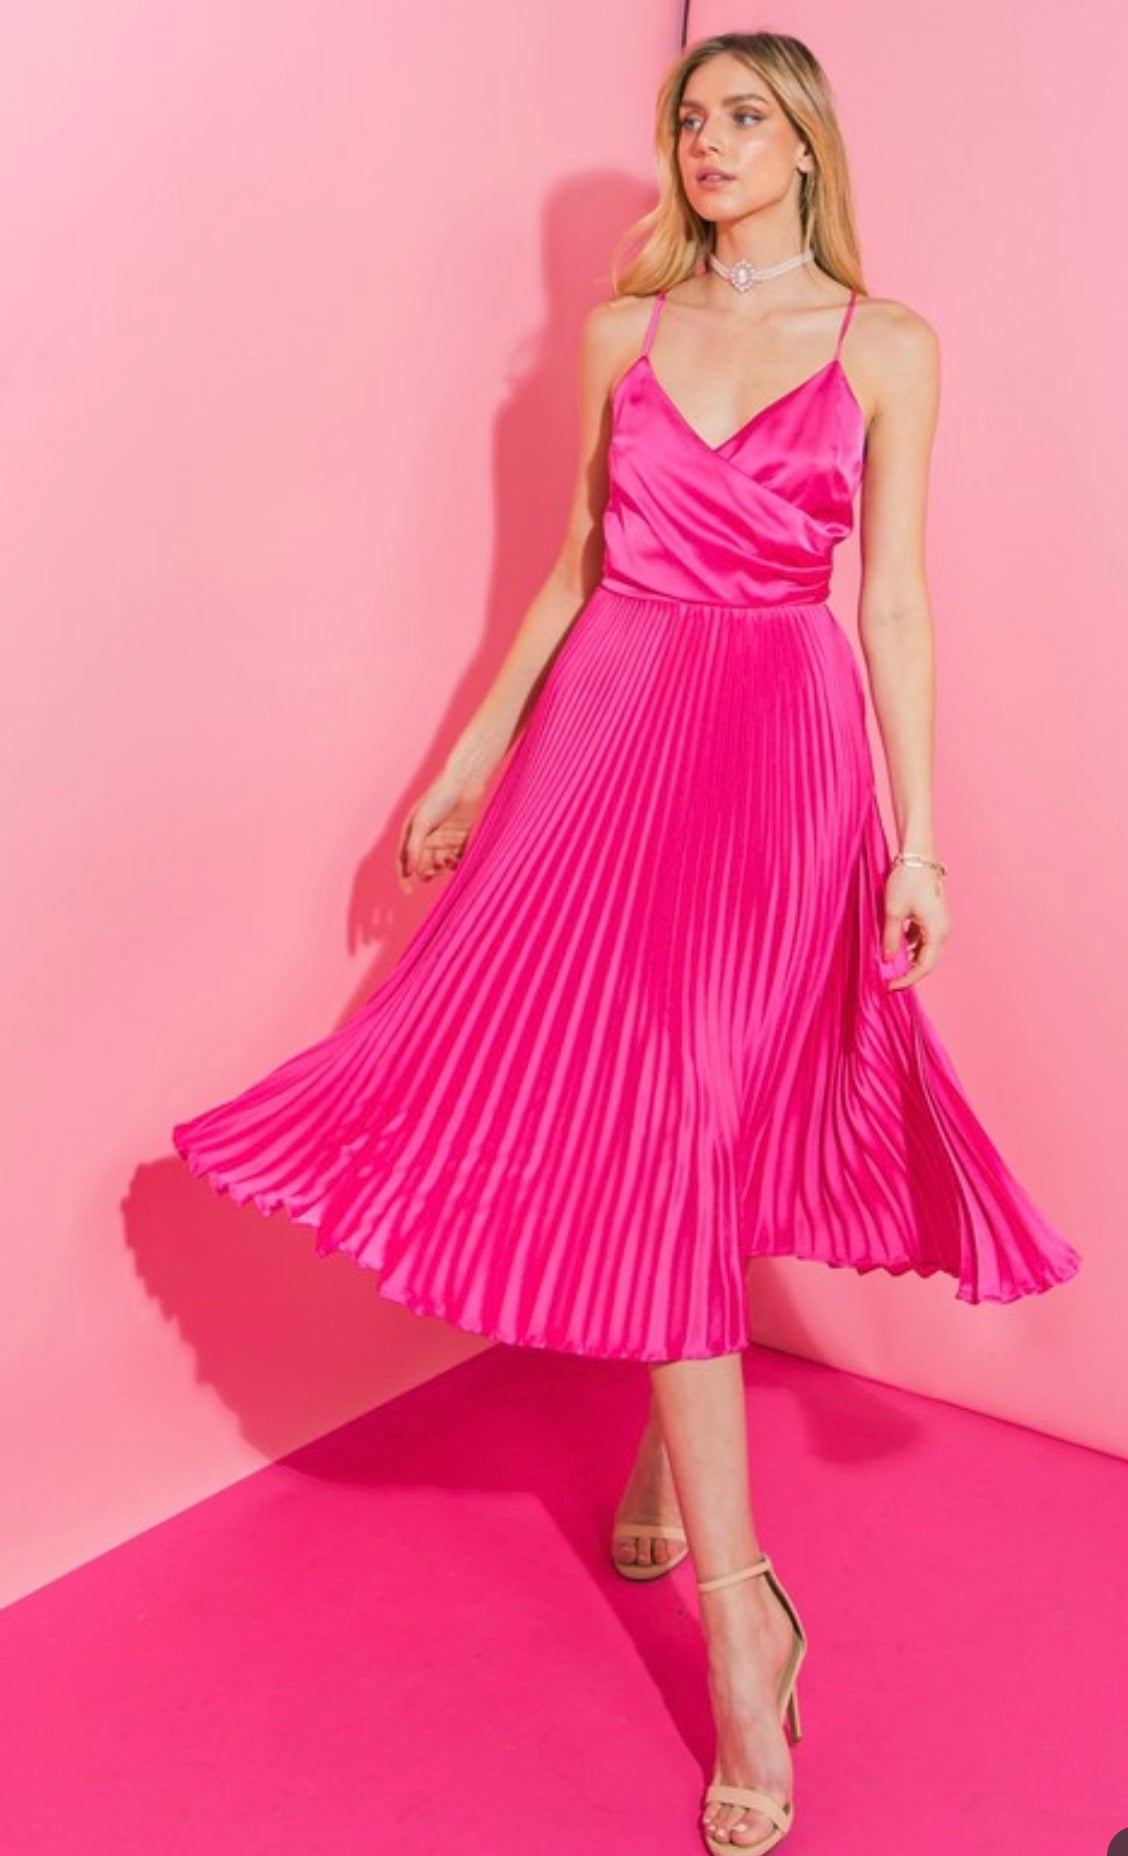 The girl in Pink Pleated Dress